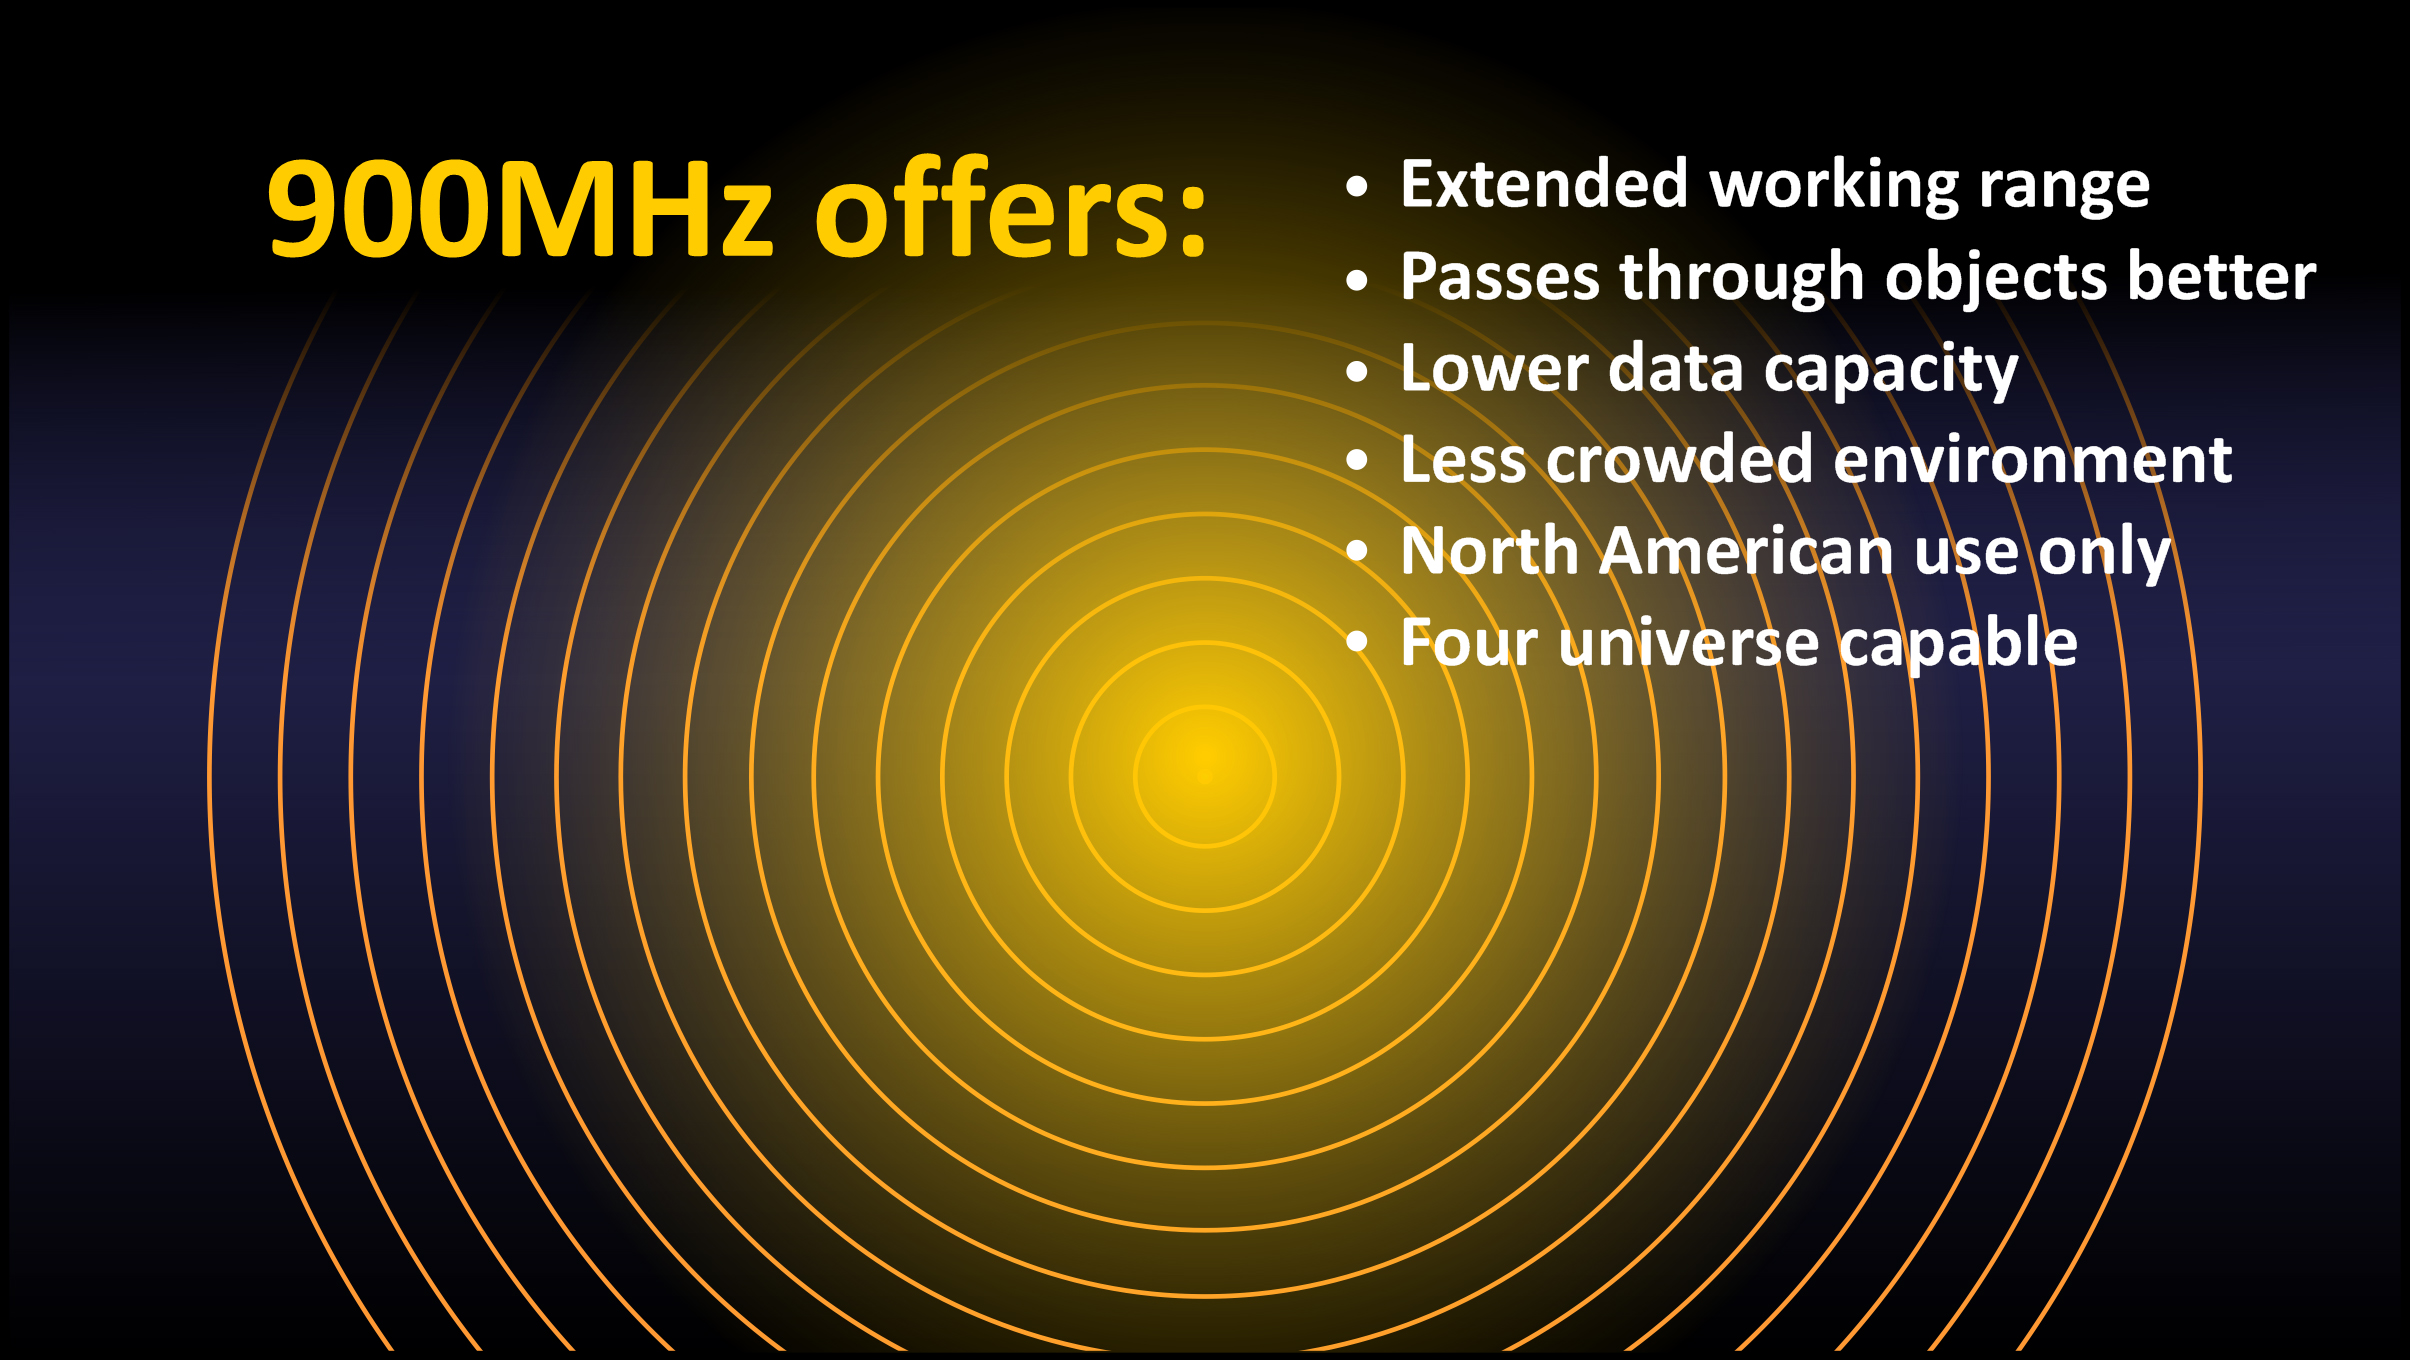 Multiverse 12 Benefits of the 900MHz RF Band